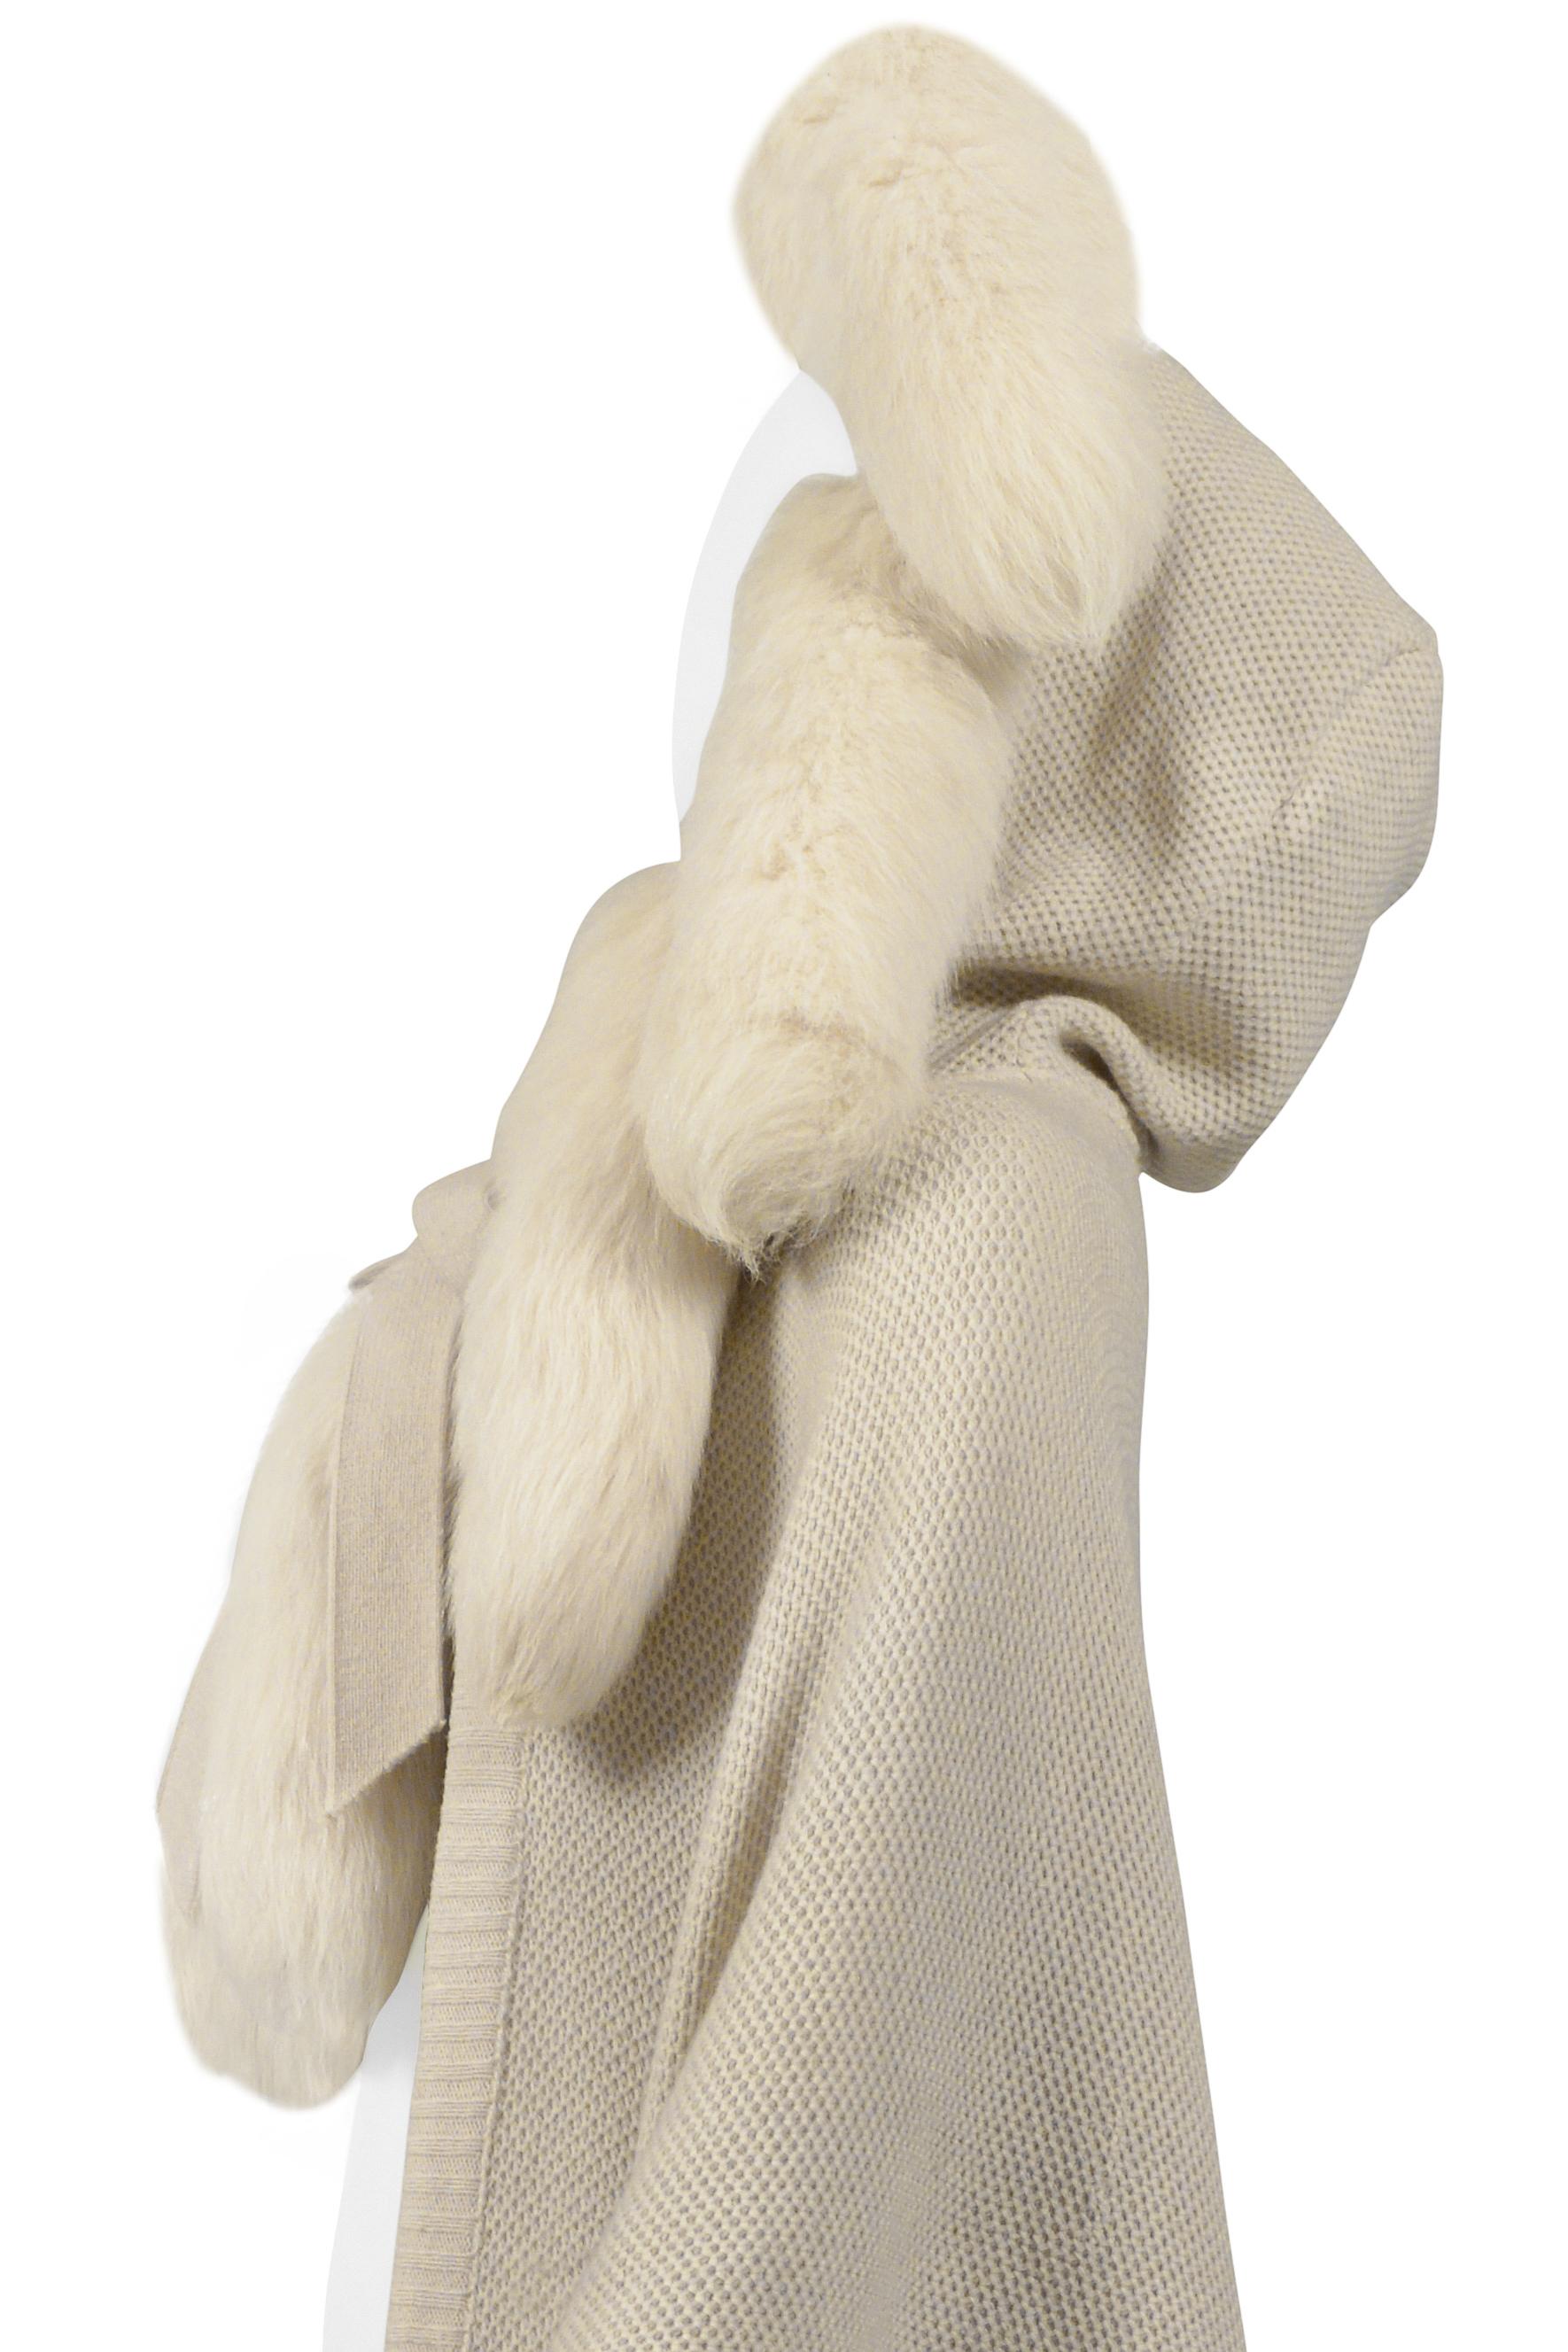 Alimia Paris Off-White Cape With Fur Tails & Leather Patches For Sale 5